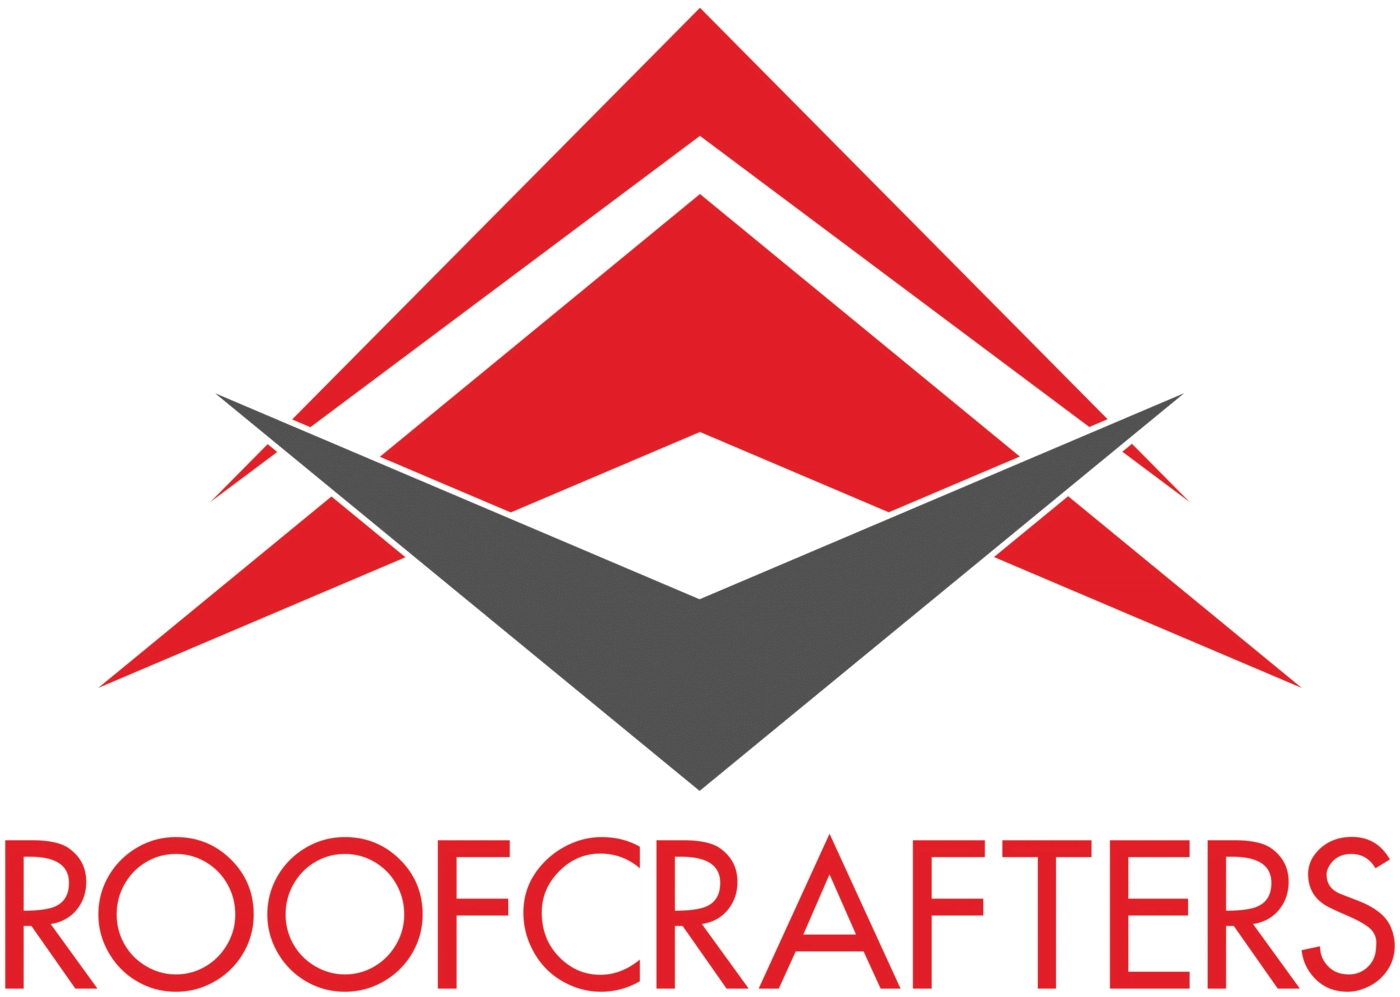 RoofCrafters Logo